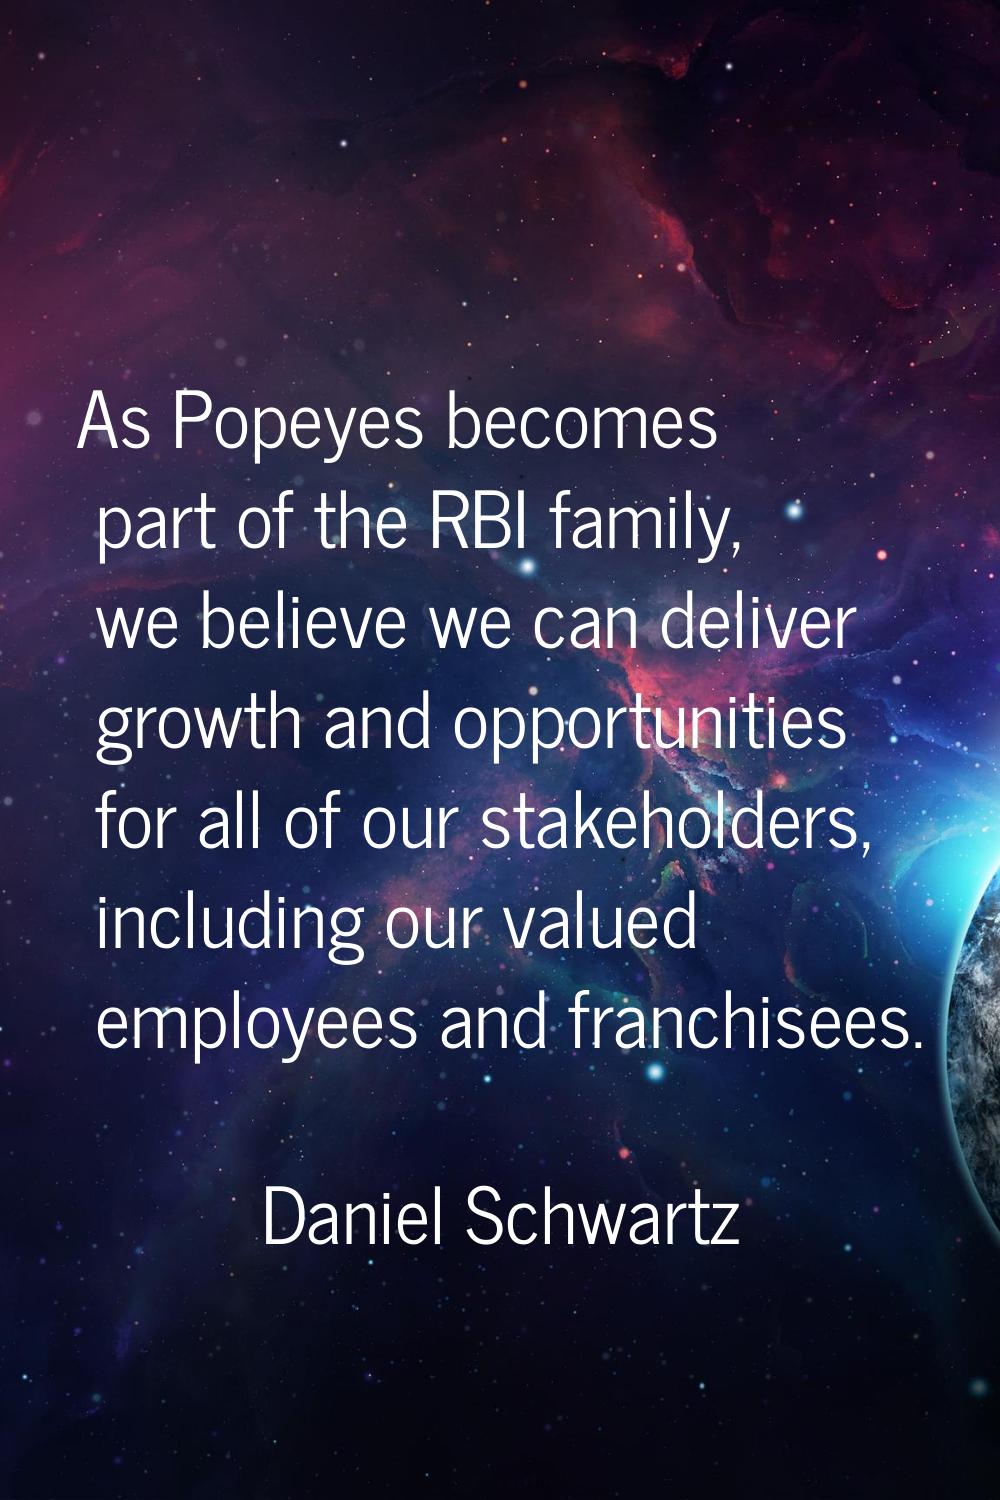 As Popeyes becomes part of the RBI family, we believe we can deliver growth and opportunities for a